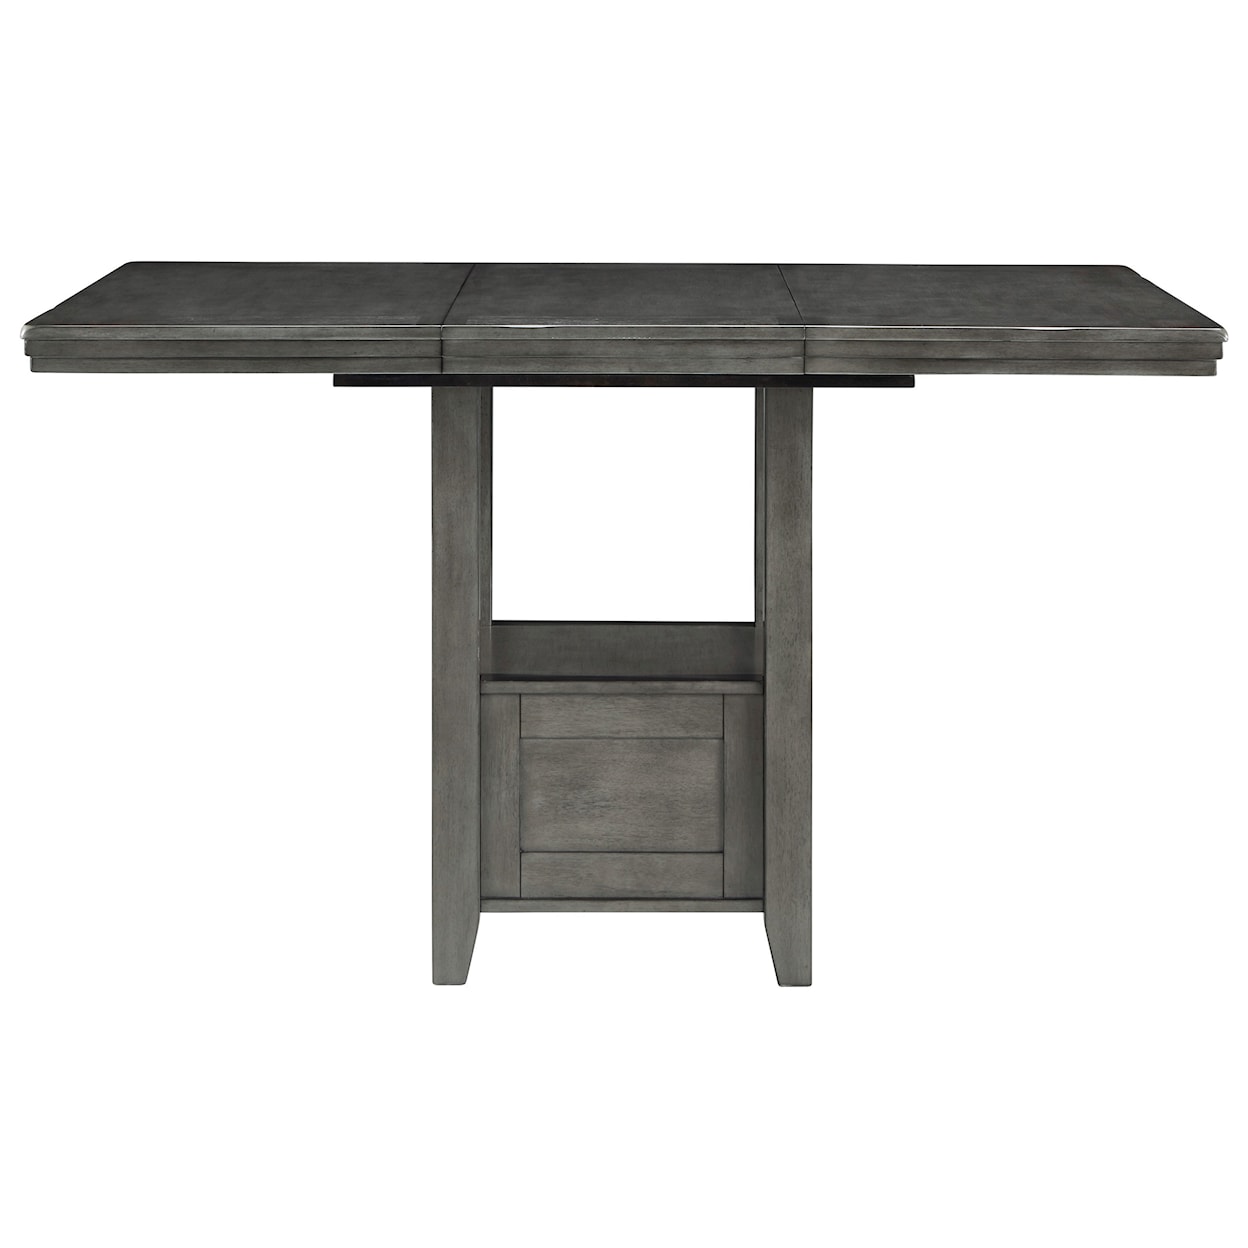 Signature Design by Ashley Hallanden Counter Height Dining Table